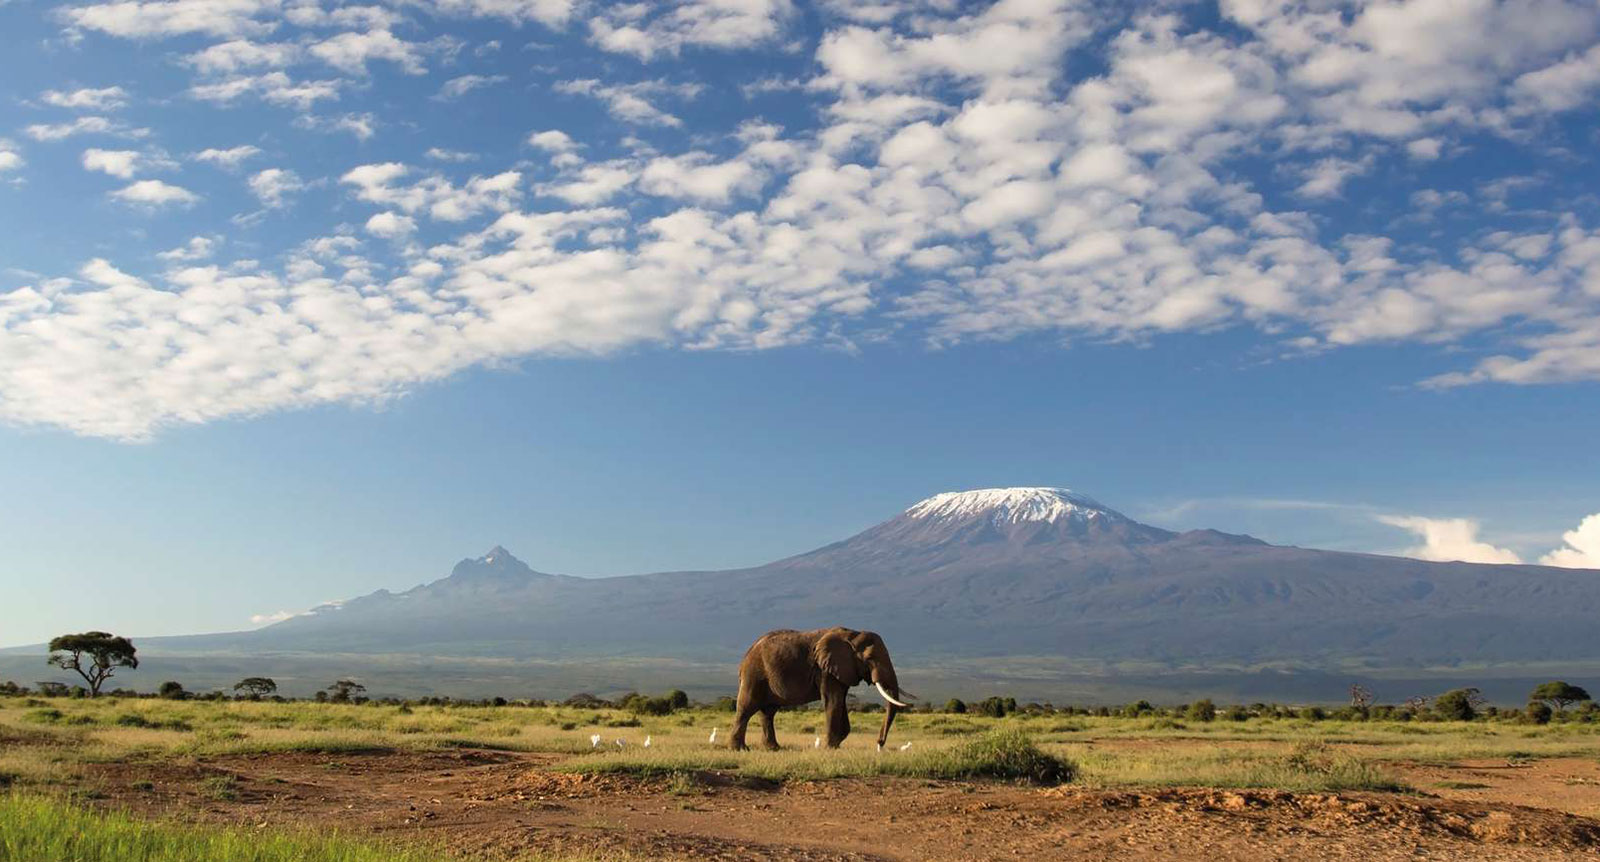 10 iconic places to visit in Africa